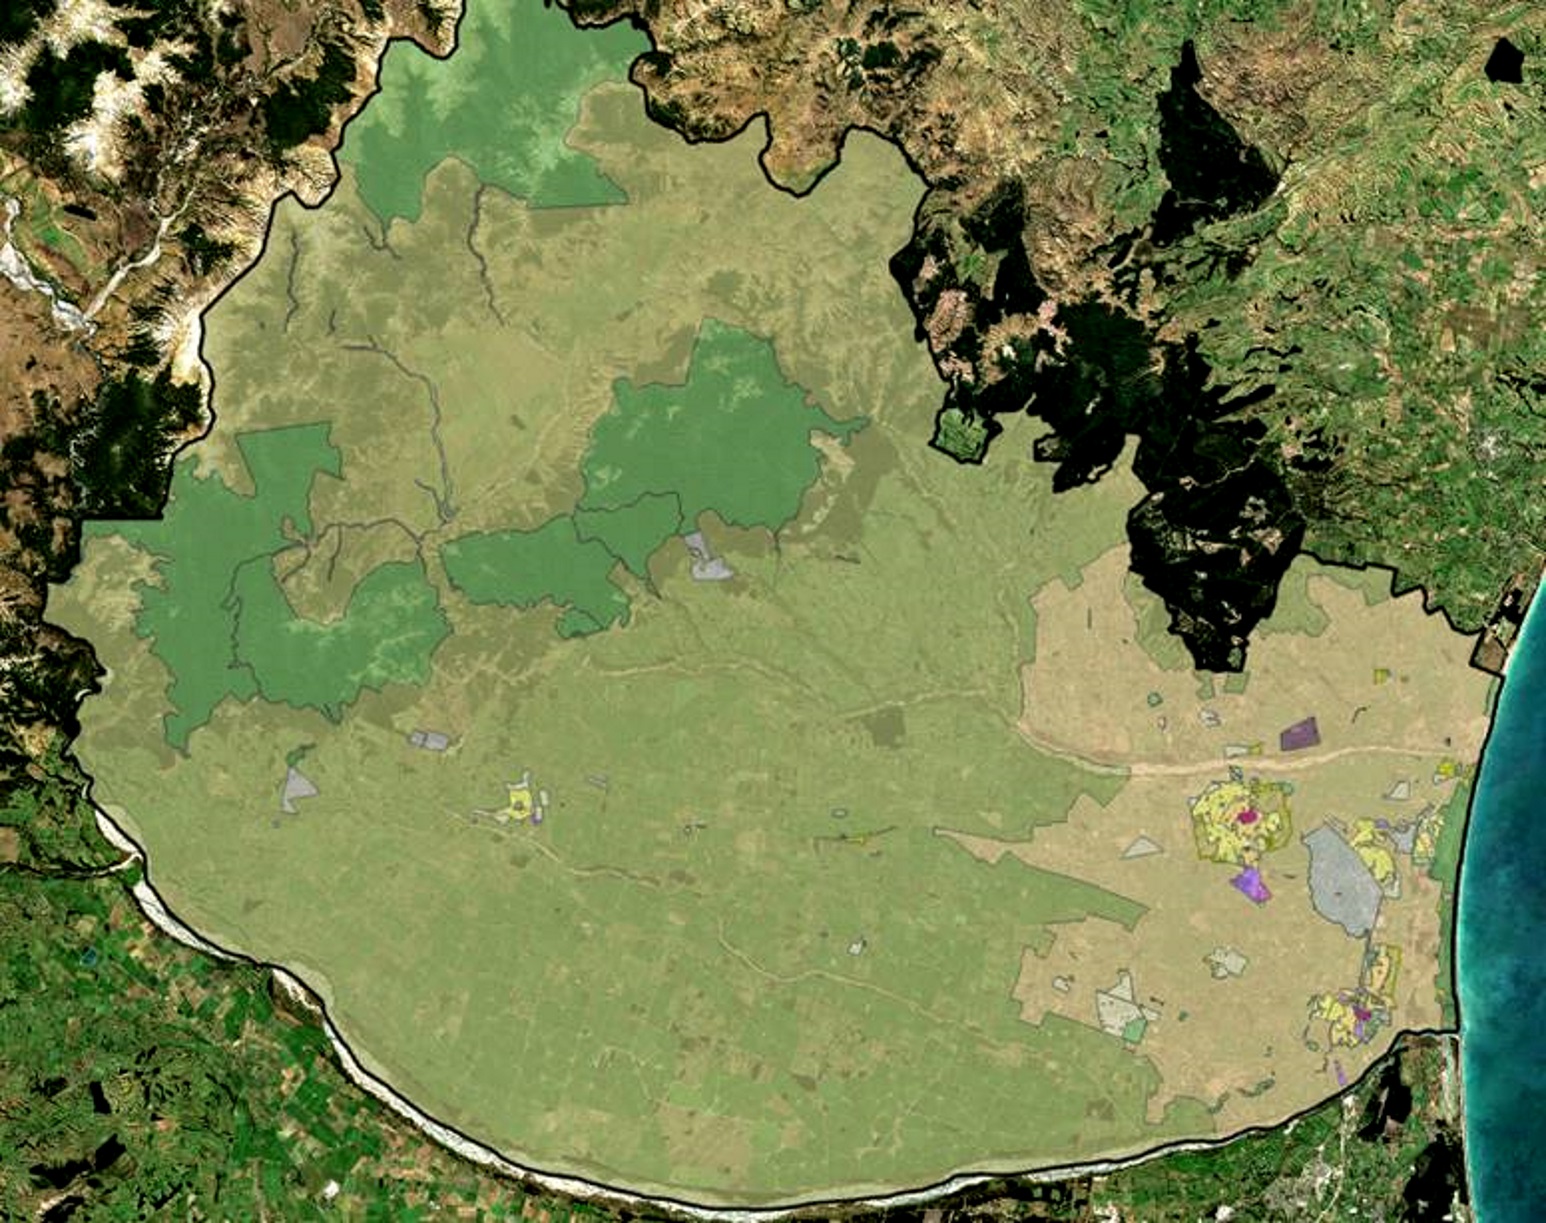 The new general zone in light green takes up much of the western area of the Waimakariri District...